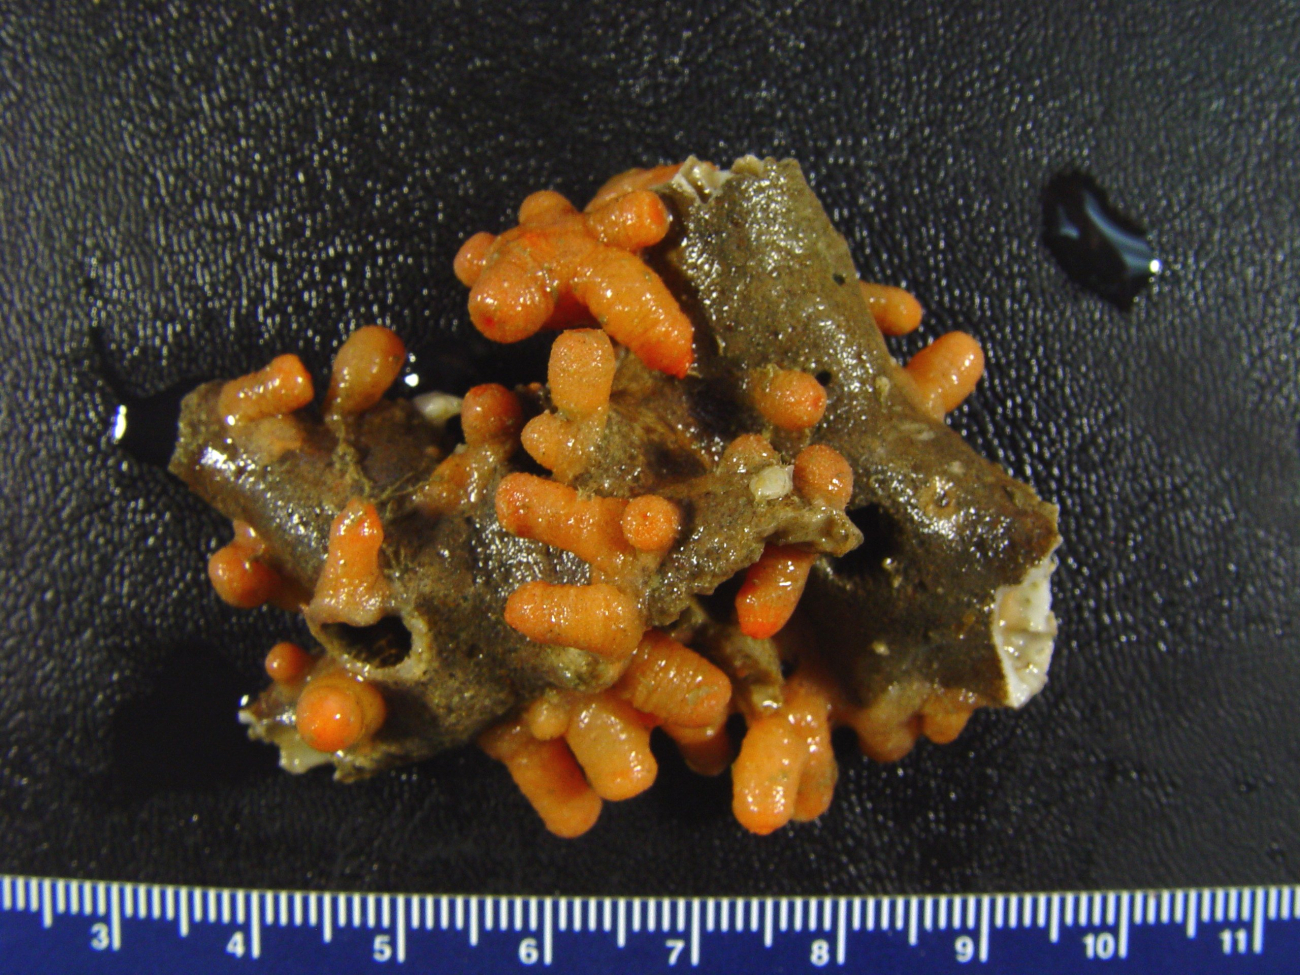 A colony of orange zooanthids